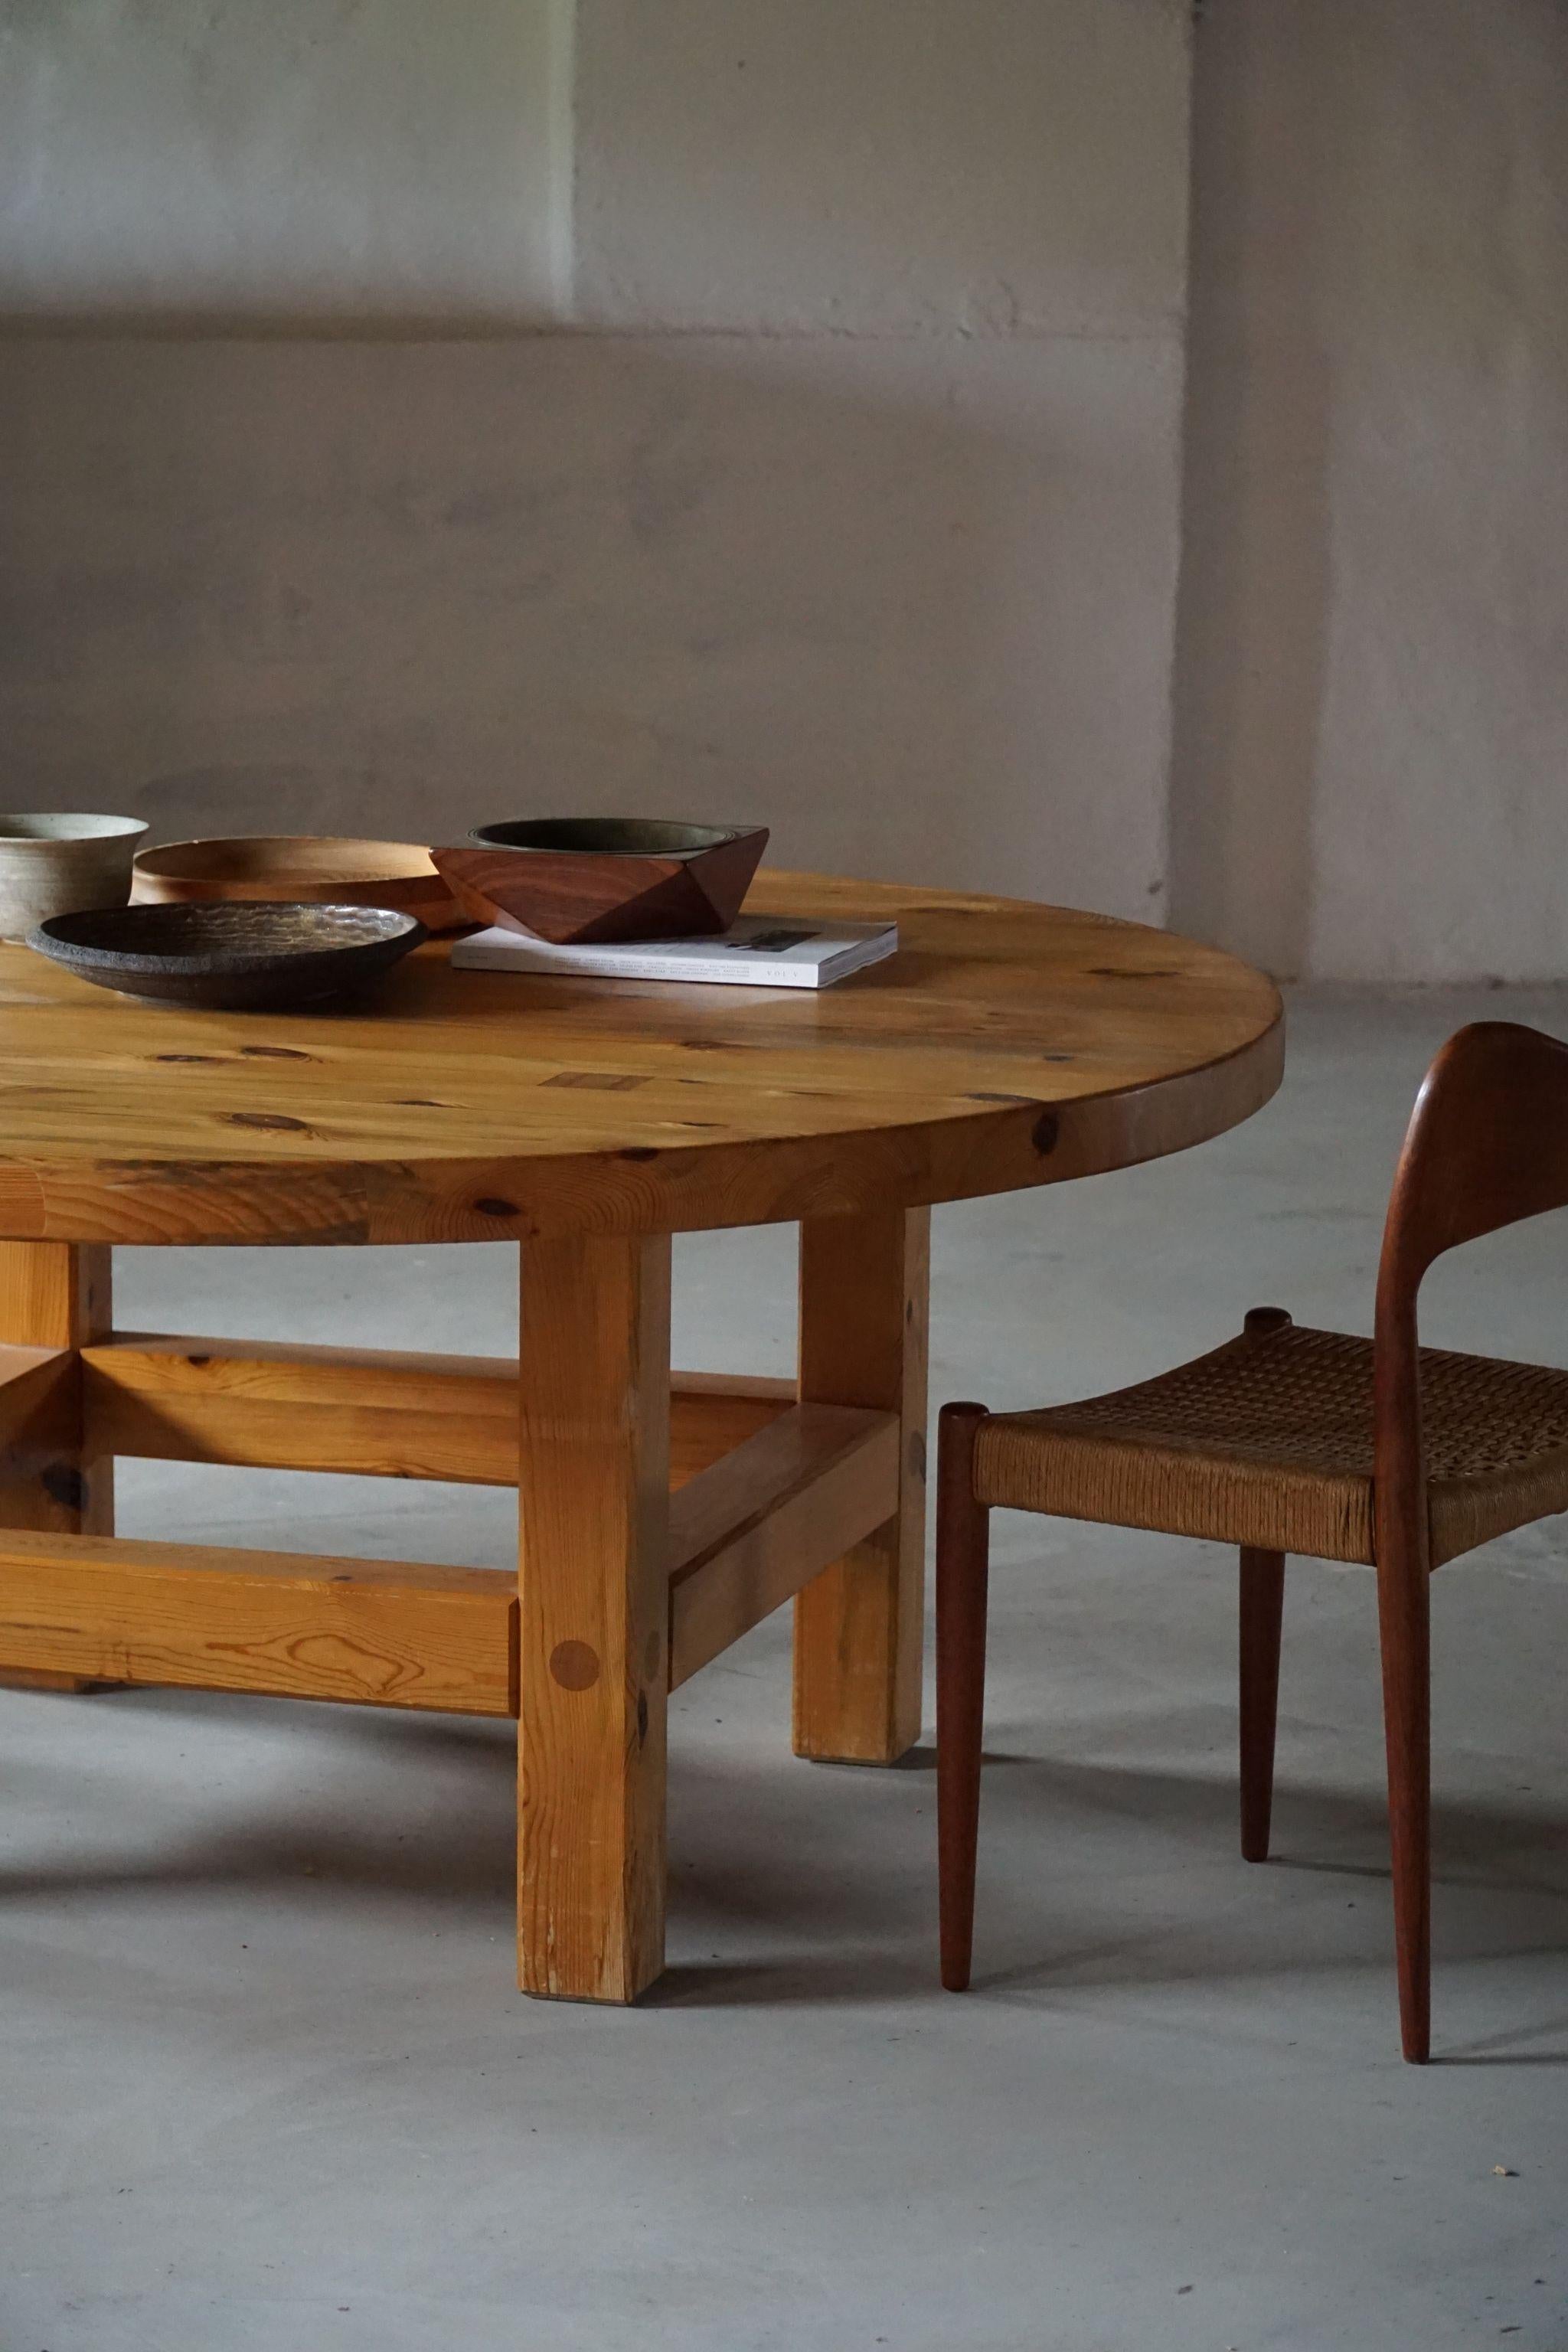 Hand-Crafted Sven Larsson, Large Round Dining Table in Solid Pine, Swedish Modern, 1960s